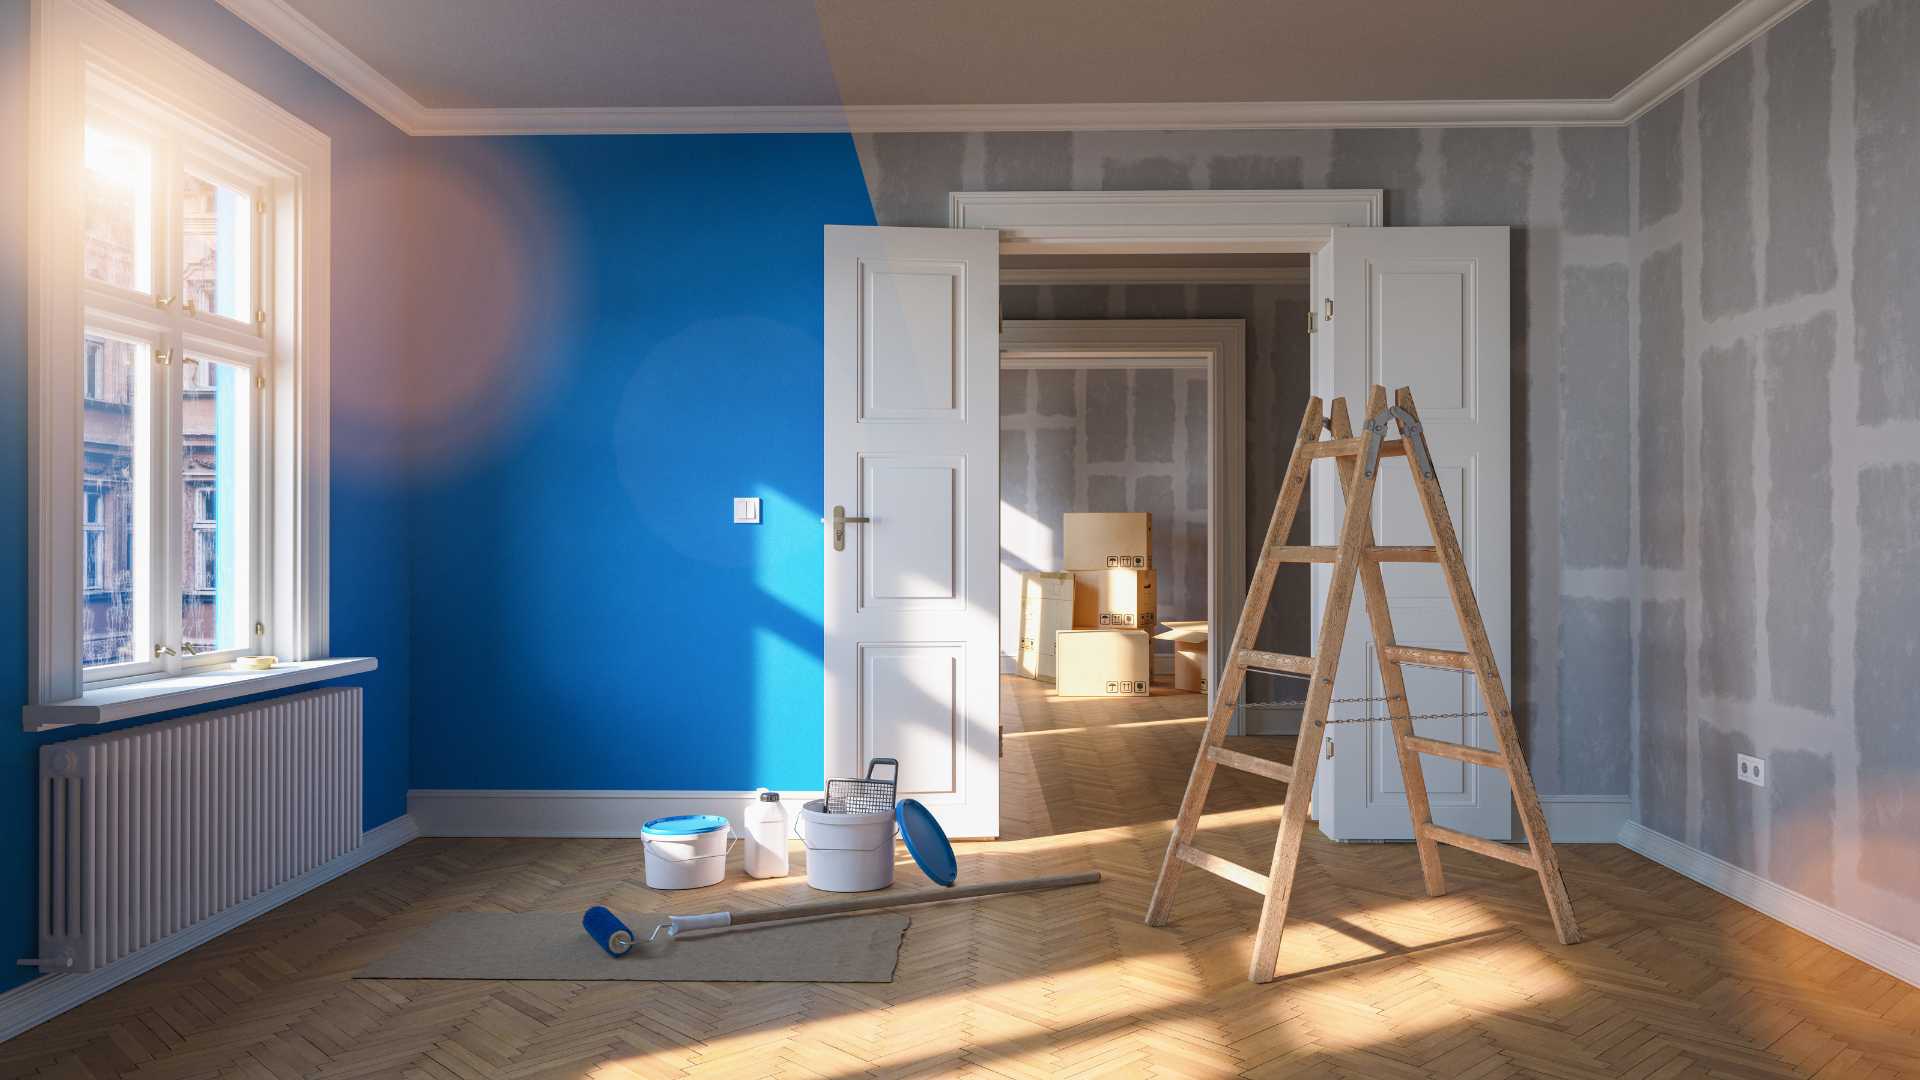 should you renovate your home before selling it